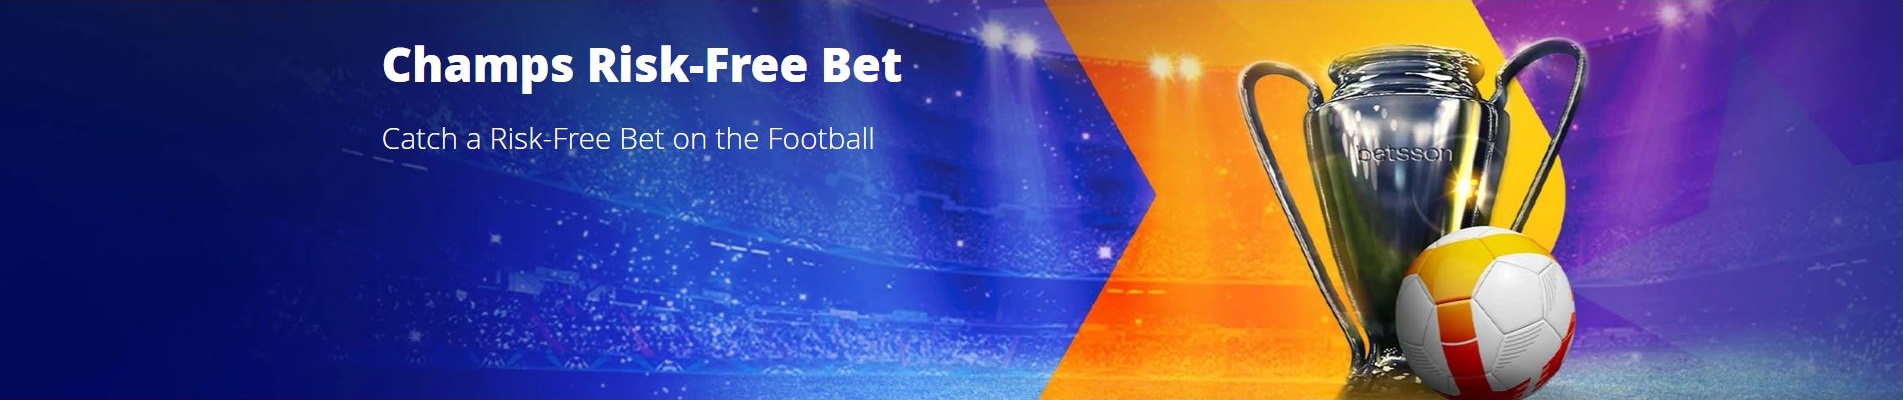 bookmaker betsson champs risk free offer